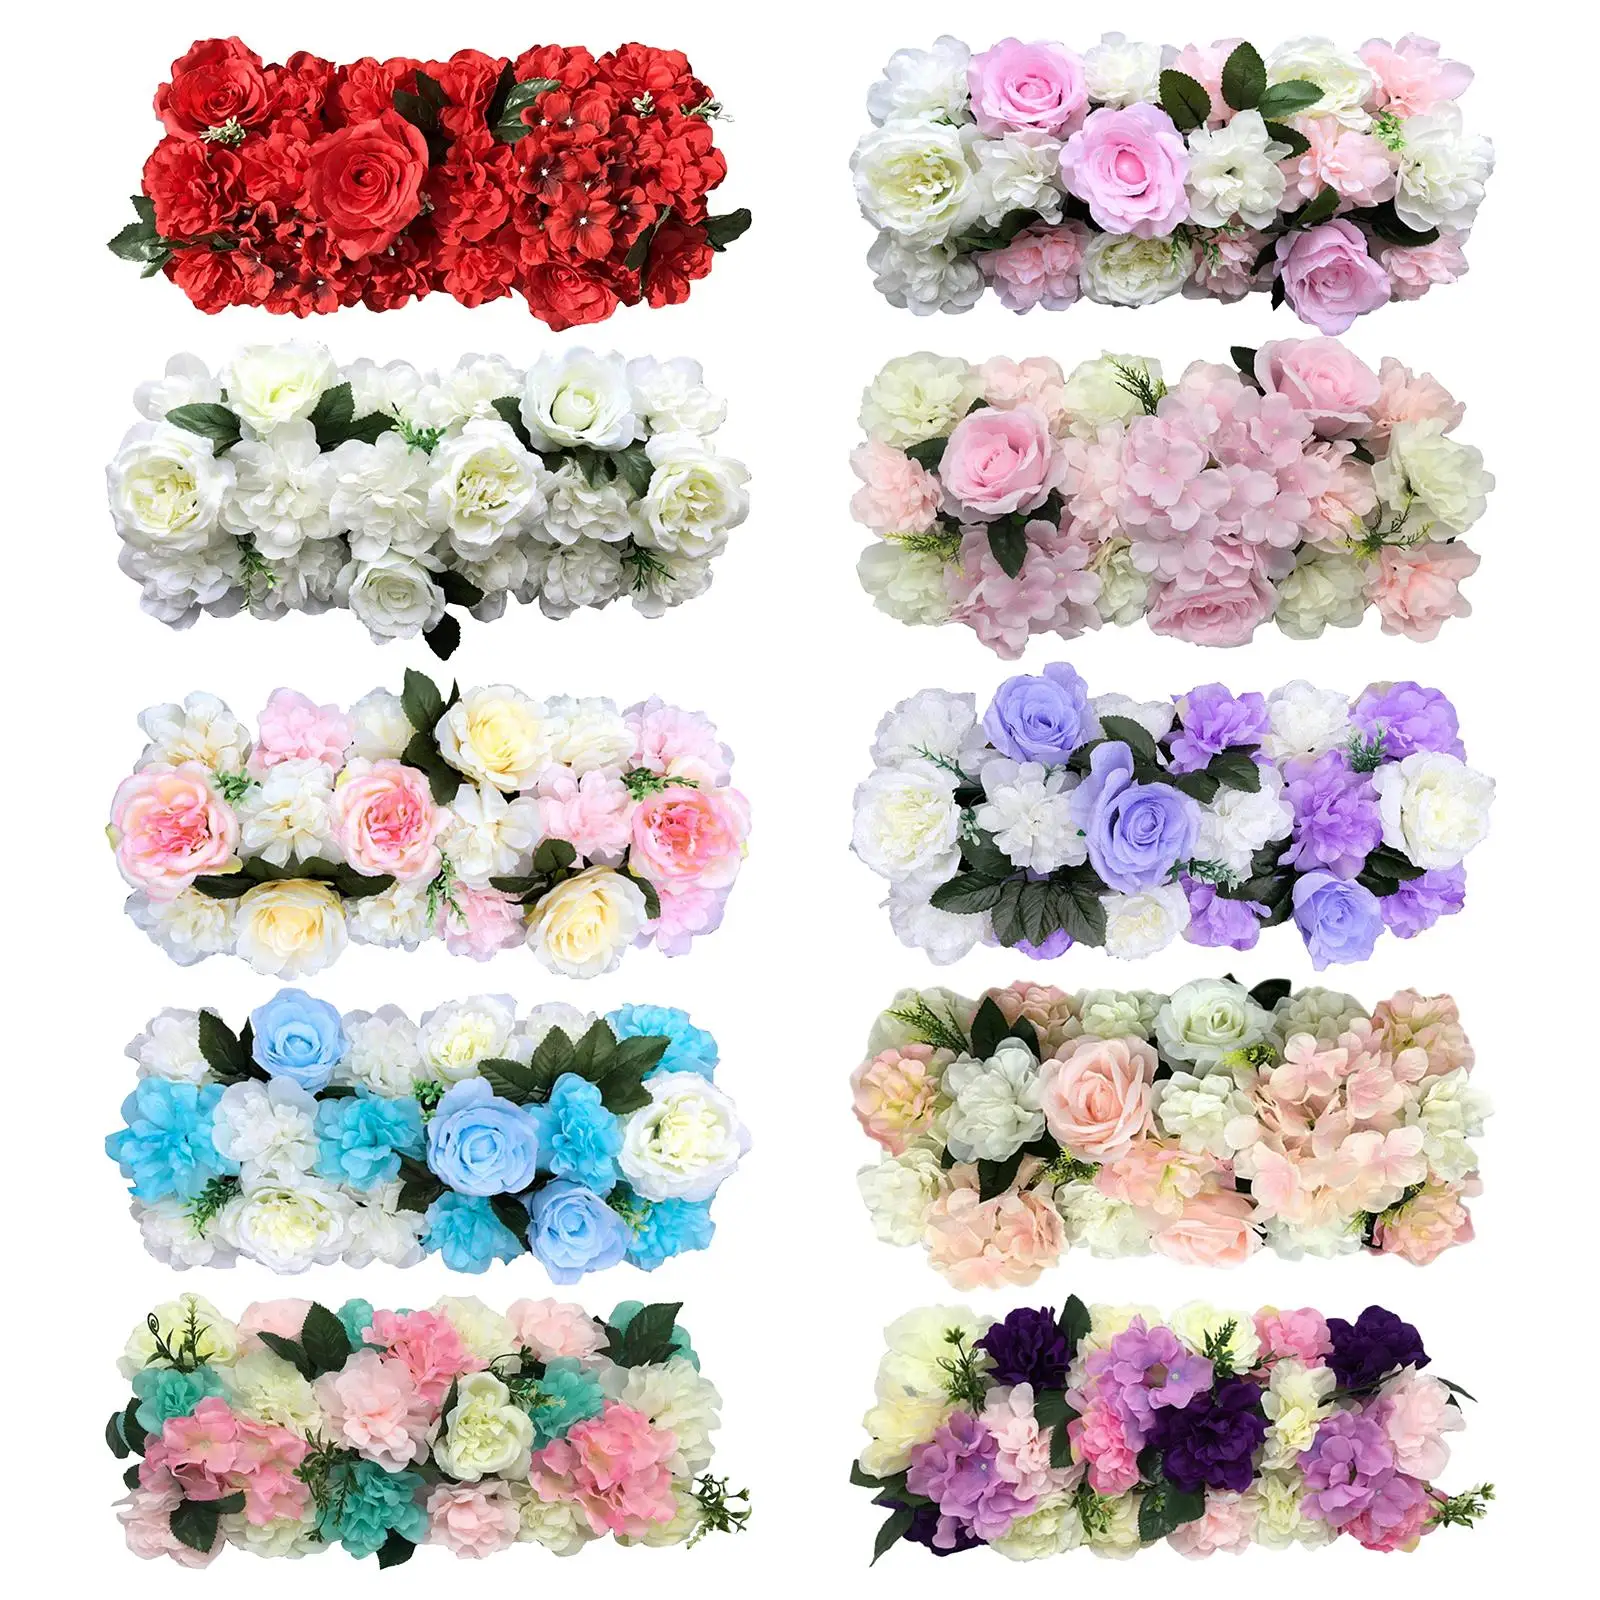 Faux Roses Artificial Flower Backdrop DIY Arched Door Flower Row 3D Flower Wall Decor for Baby Girls Room Bouquet Decoration